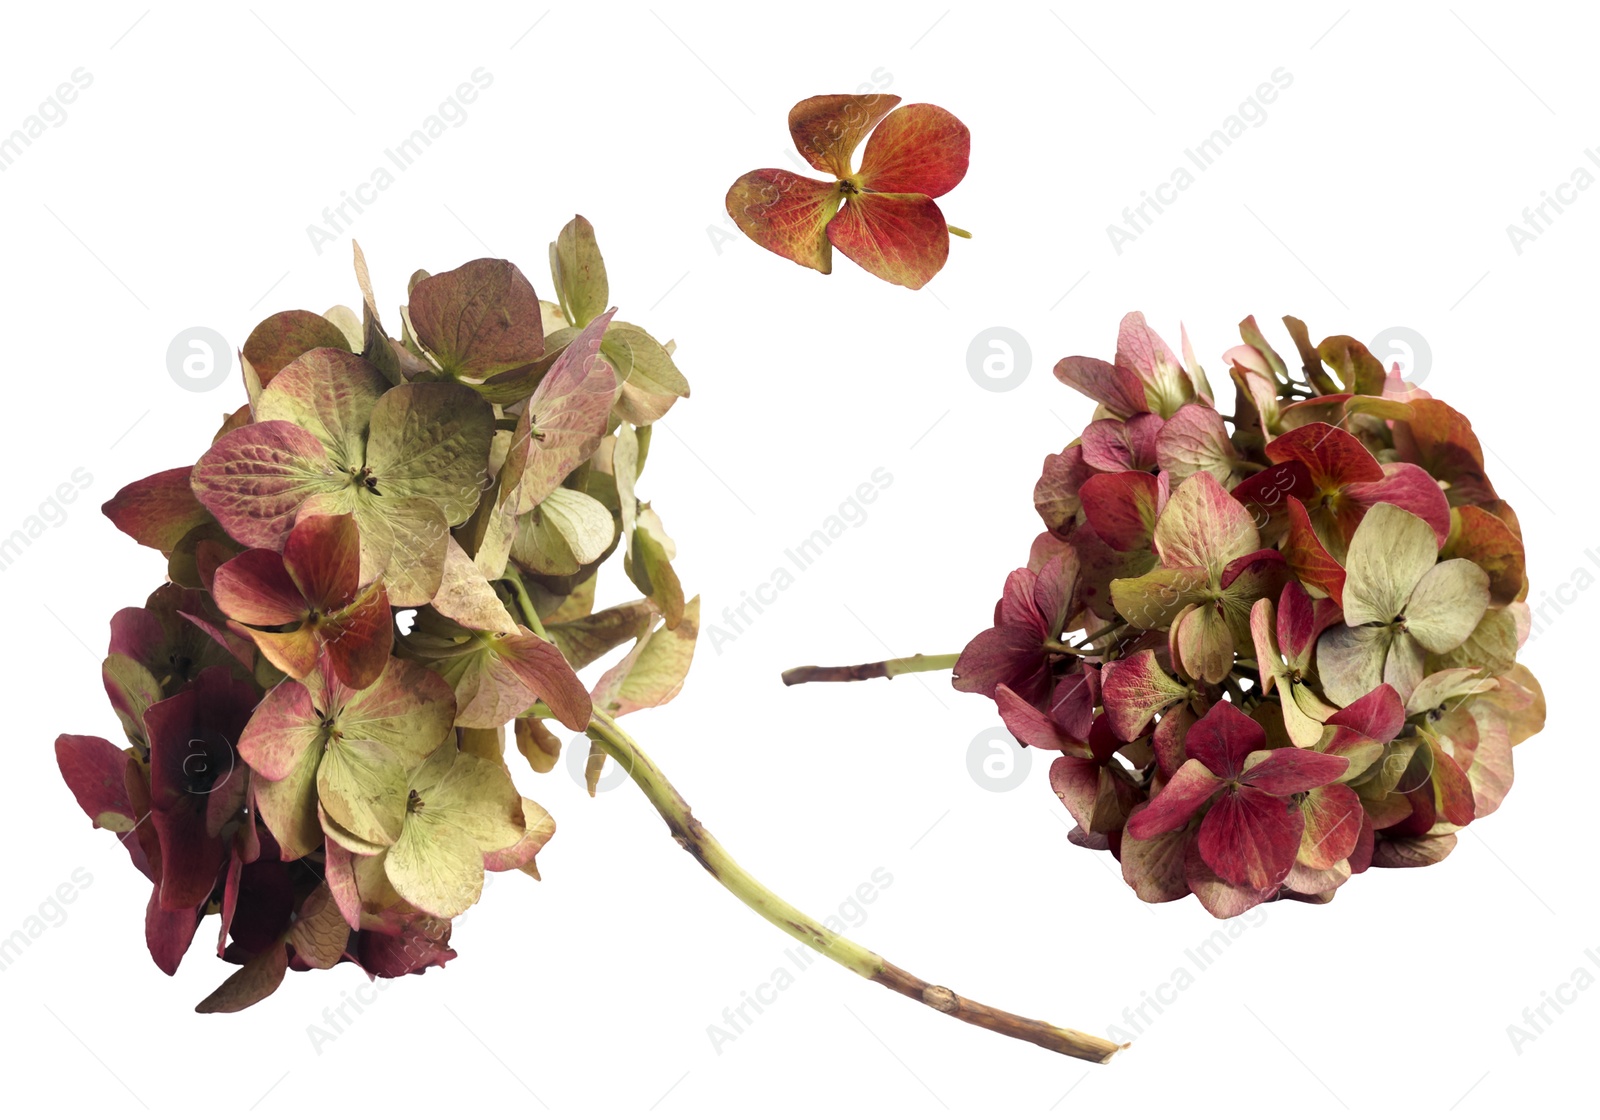 Image of Collage with dry hortensia (hydrangea) on white background